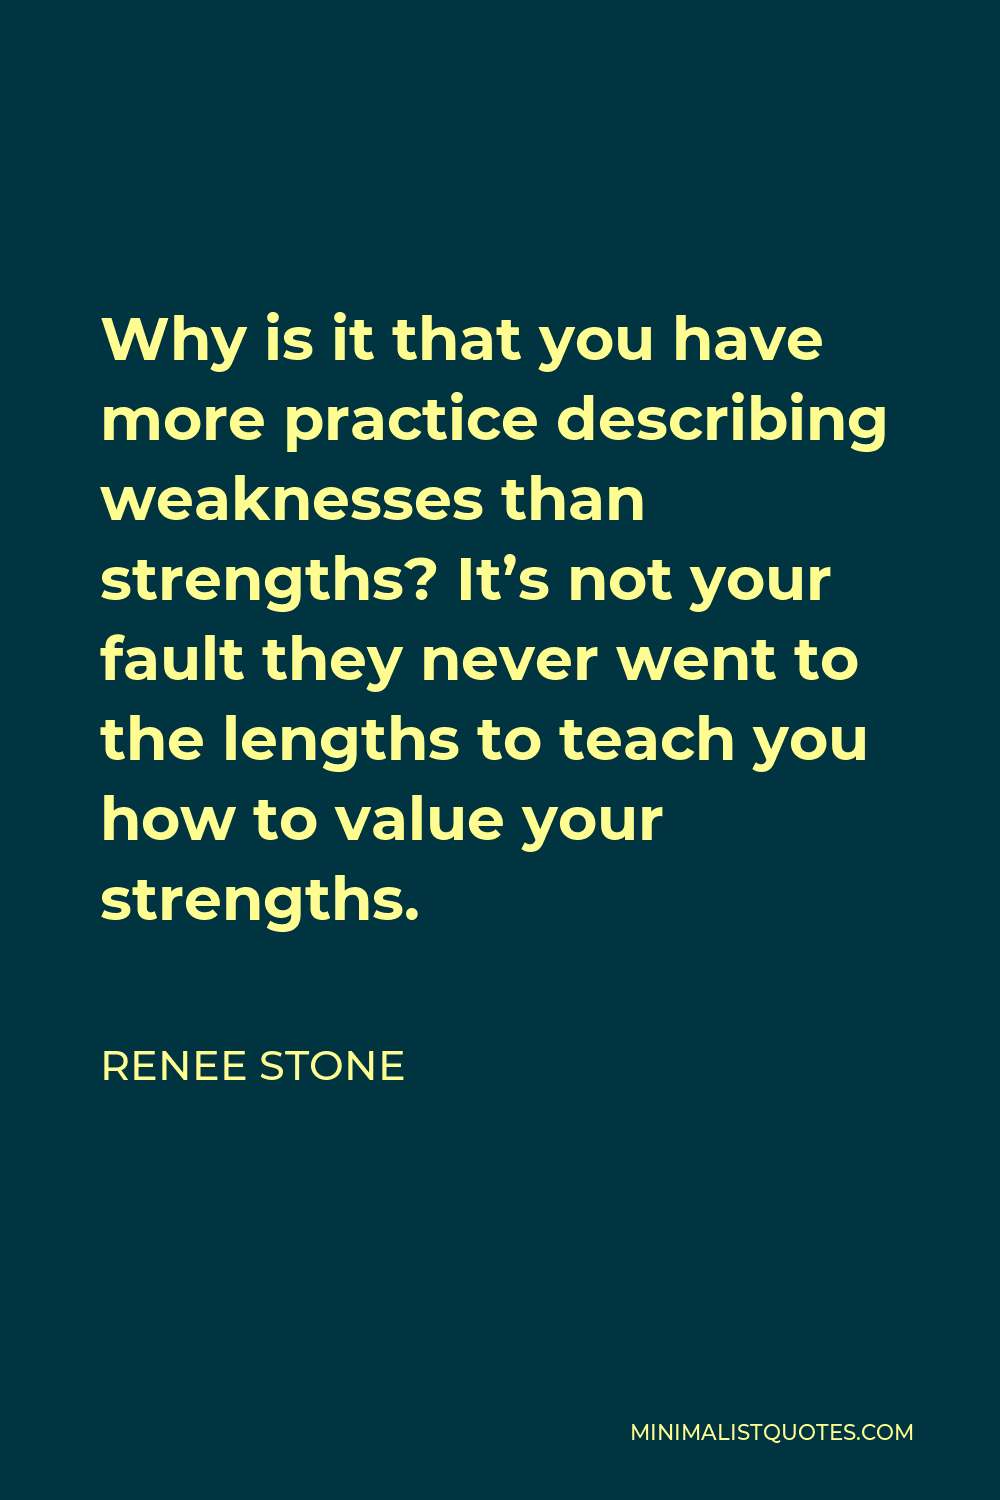 Renee Stone Quote - Why is it that you have more practice describing weaknesses than strengths? It’s not your fault they never went to the lengths to teach you how to value your strengths.